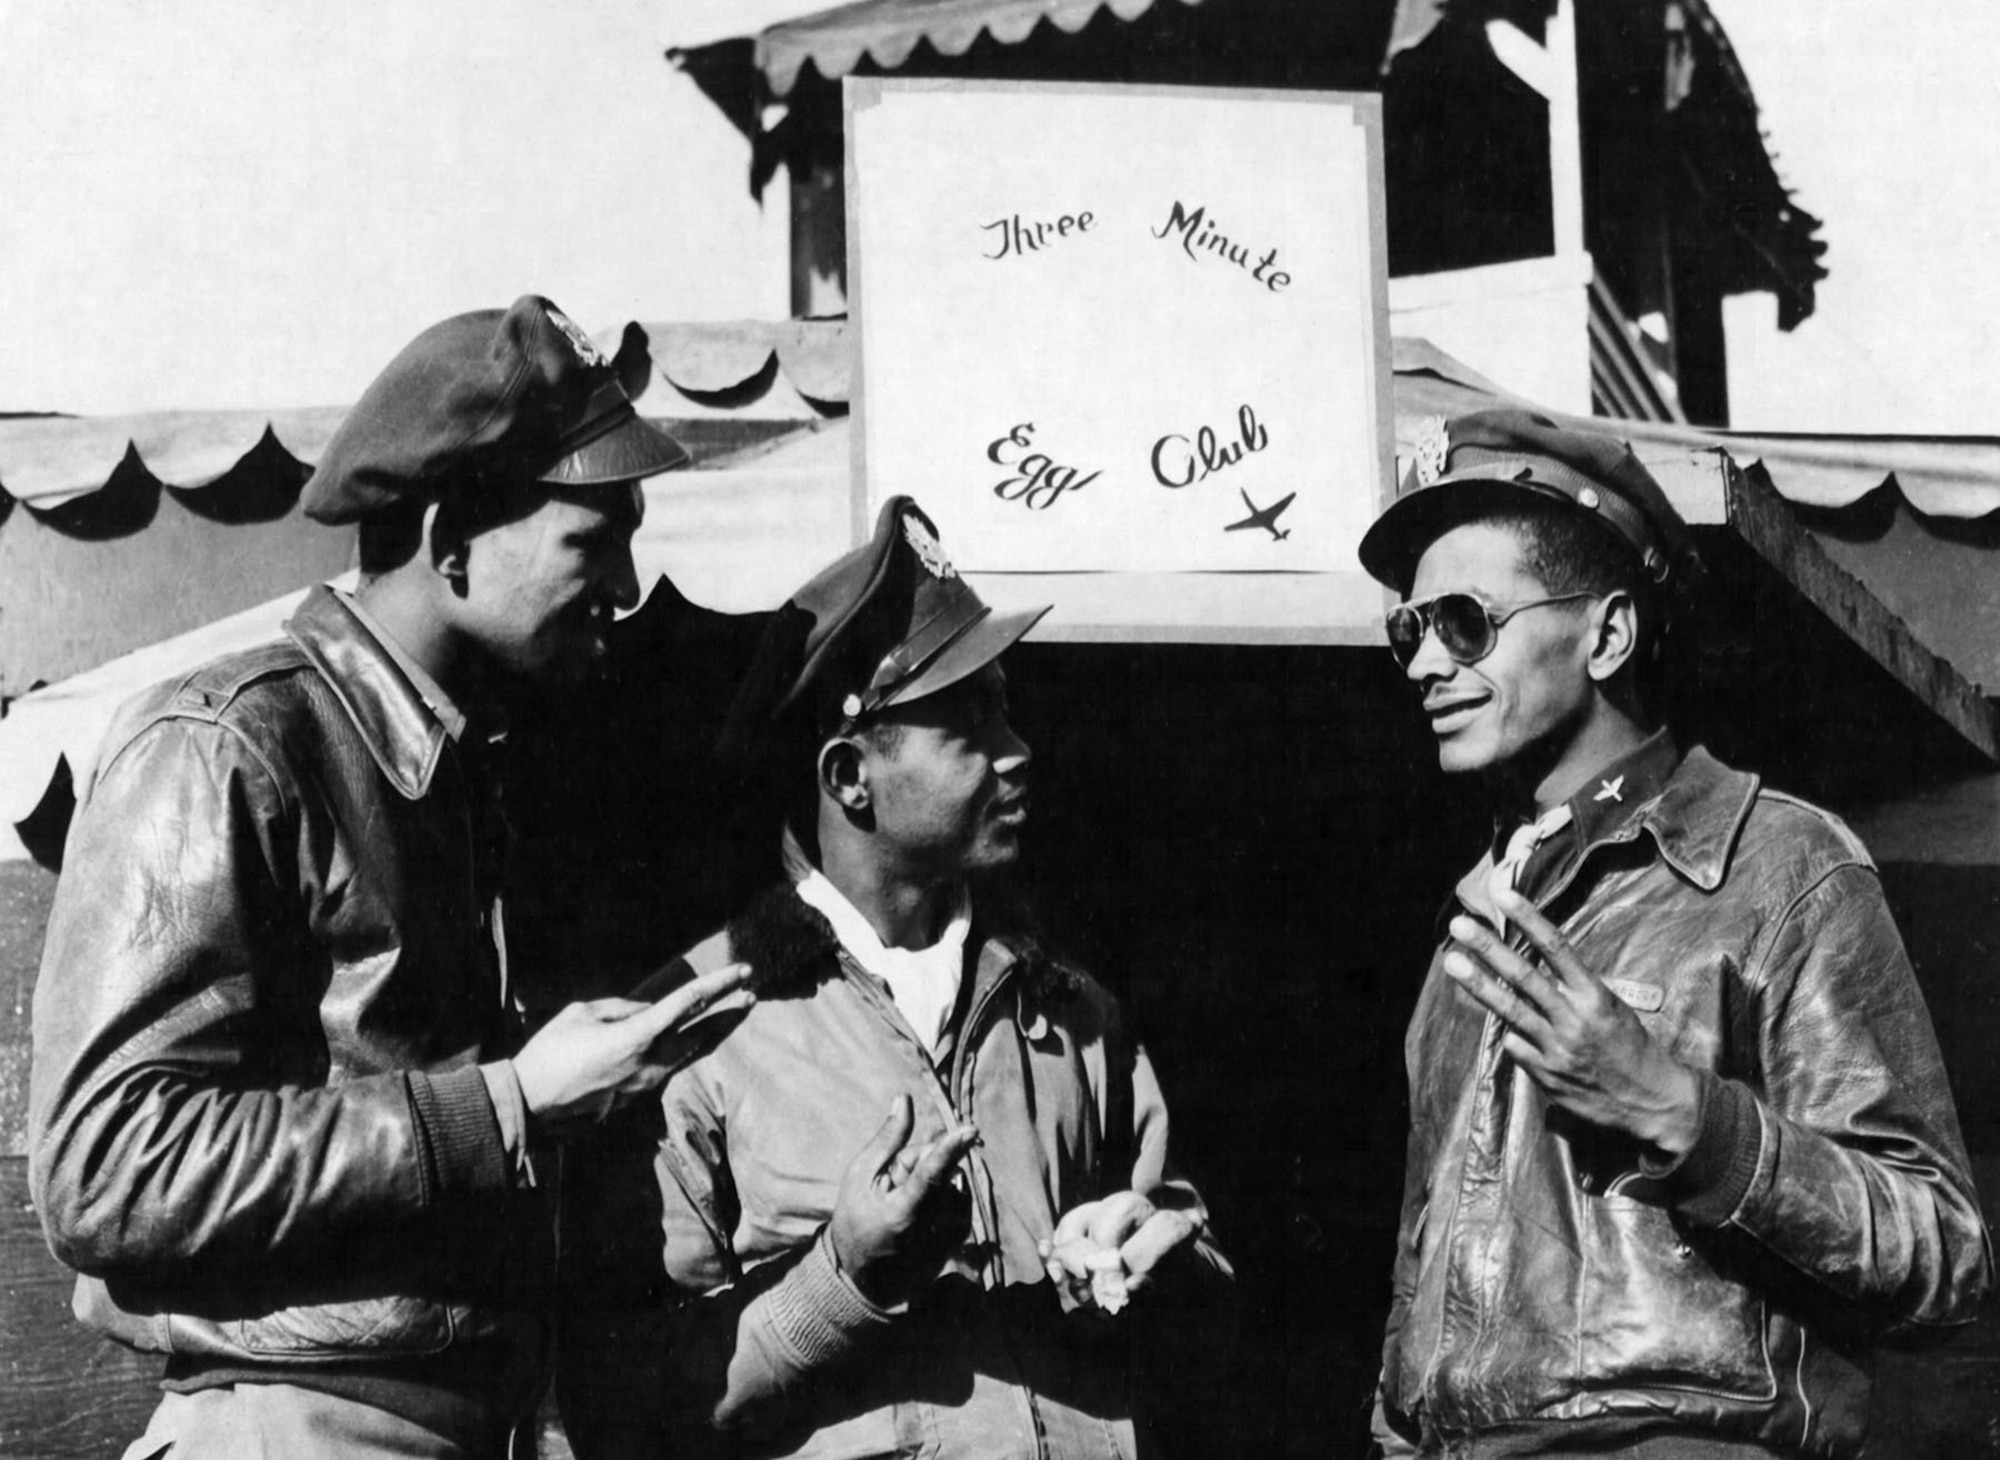 Long, dangerous missions over enemy territory and bad weather sometimes meant that pilots returned to base with enough gas for just three minutes of flying time -- the time it takes to boil an egg. Some Tuskegee Airmen decided to form the “Three Minute Eggs Club,” with membership limited to those who landed within the narrow margin. Left to right are 1st Lt. Clarence W. Dart, 1st Lt. Wilson Eagleson, II and 2nd Lt. William Olsbrook (October 1944). (U.S. Air Force photo)